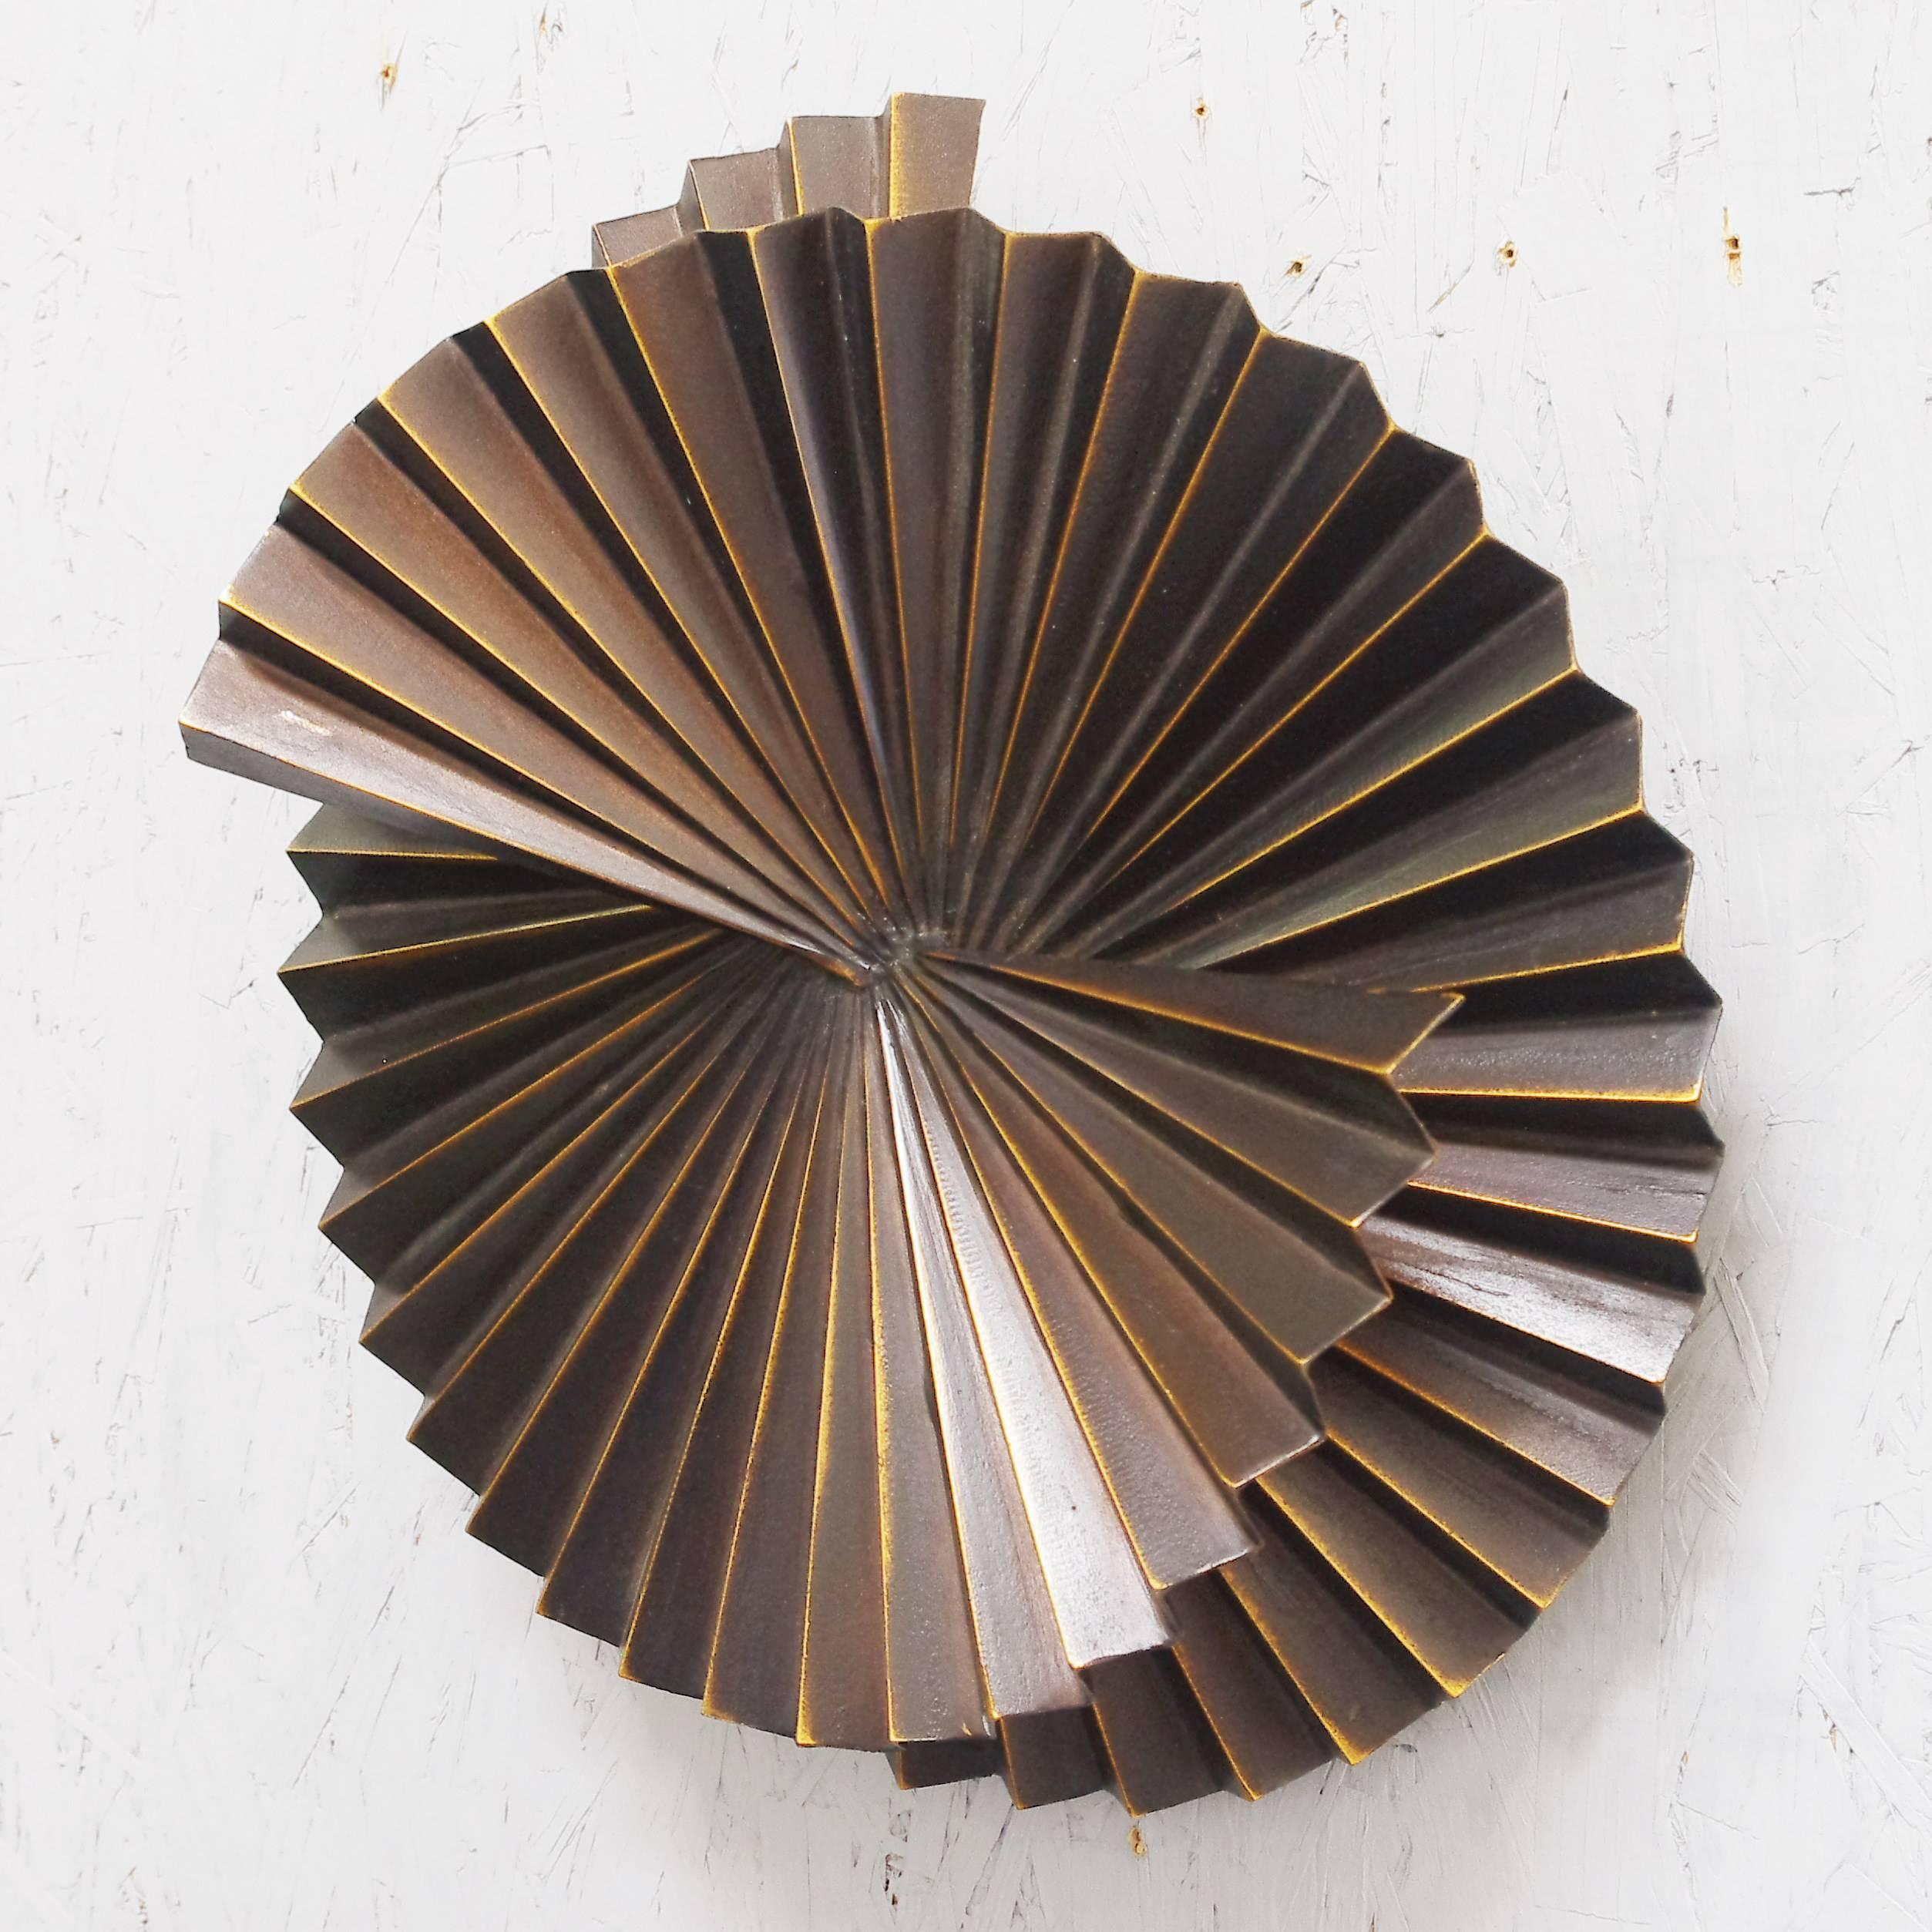 Limited edition pair of dark bronzed metal sconces or wall sculptures with spiral fan design / Designed by Fabio Bergomi for Fabio Ltd 
1 light / E26 or E27 type / max 60W
Diameter: 16 inches / Depth: 7 inches
1 pair in stock in Palm Springs